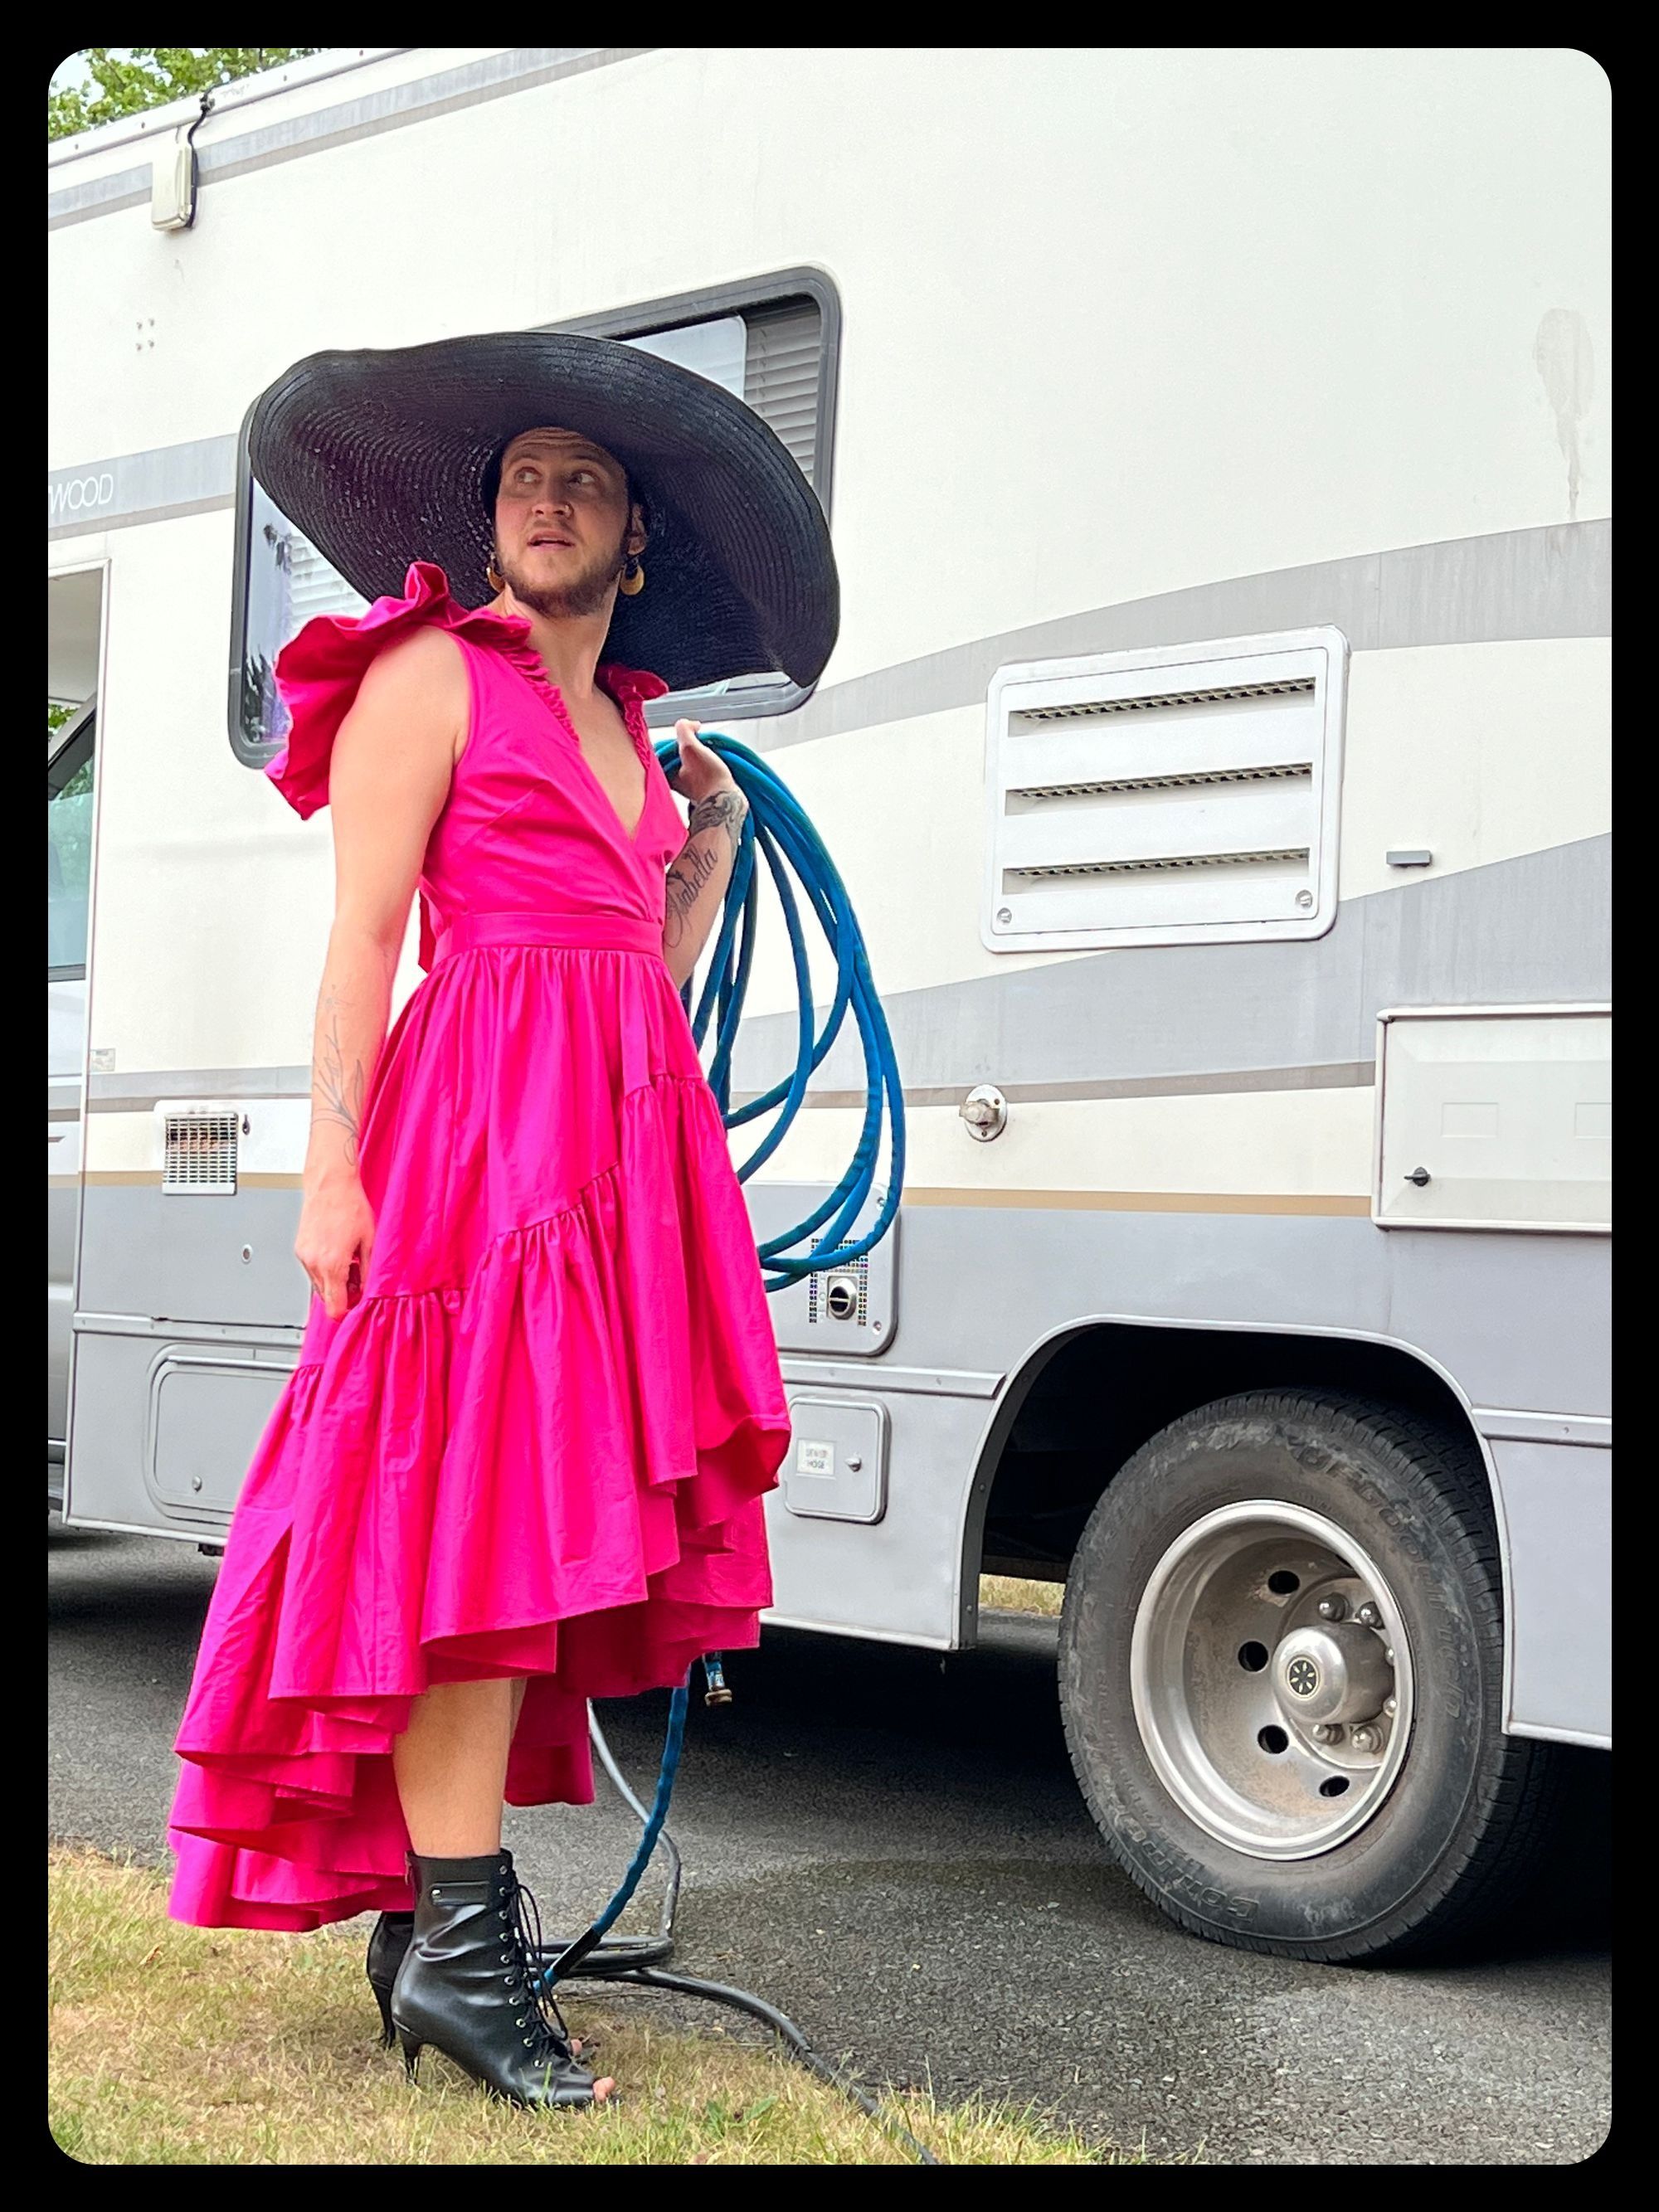 Photo: A man in a magenta ruffled dress and oversize black straw hat holds a hose outside an RV.